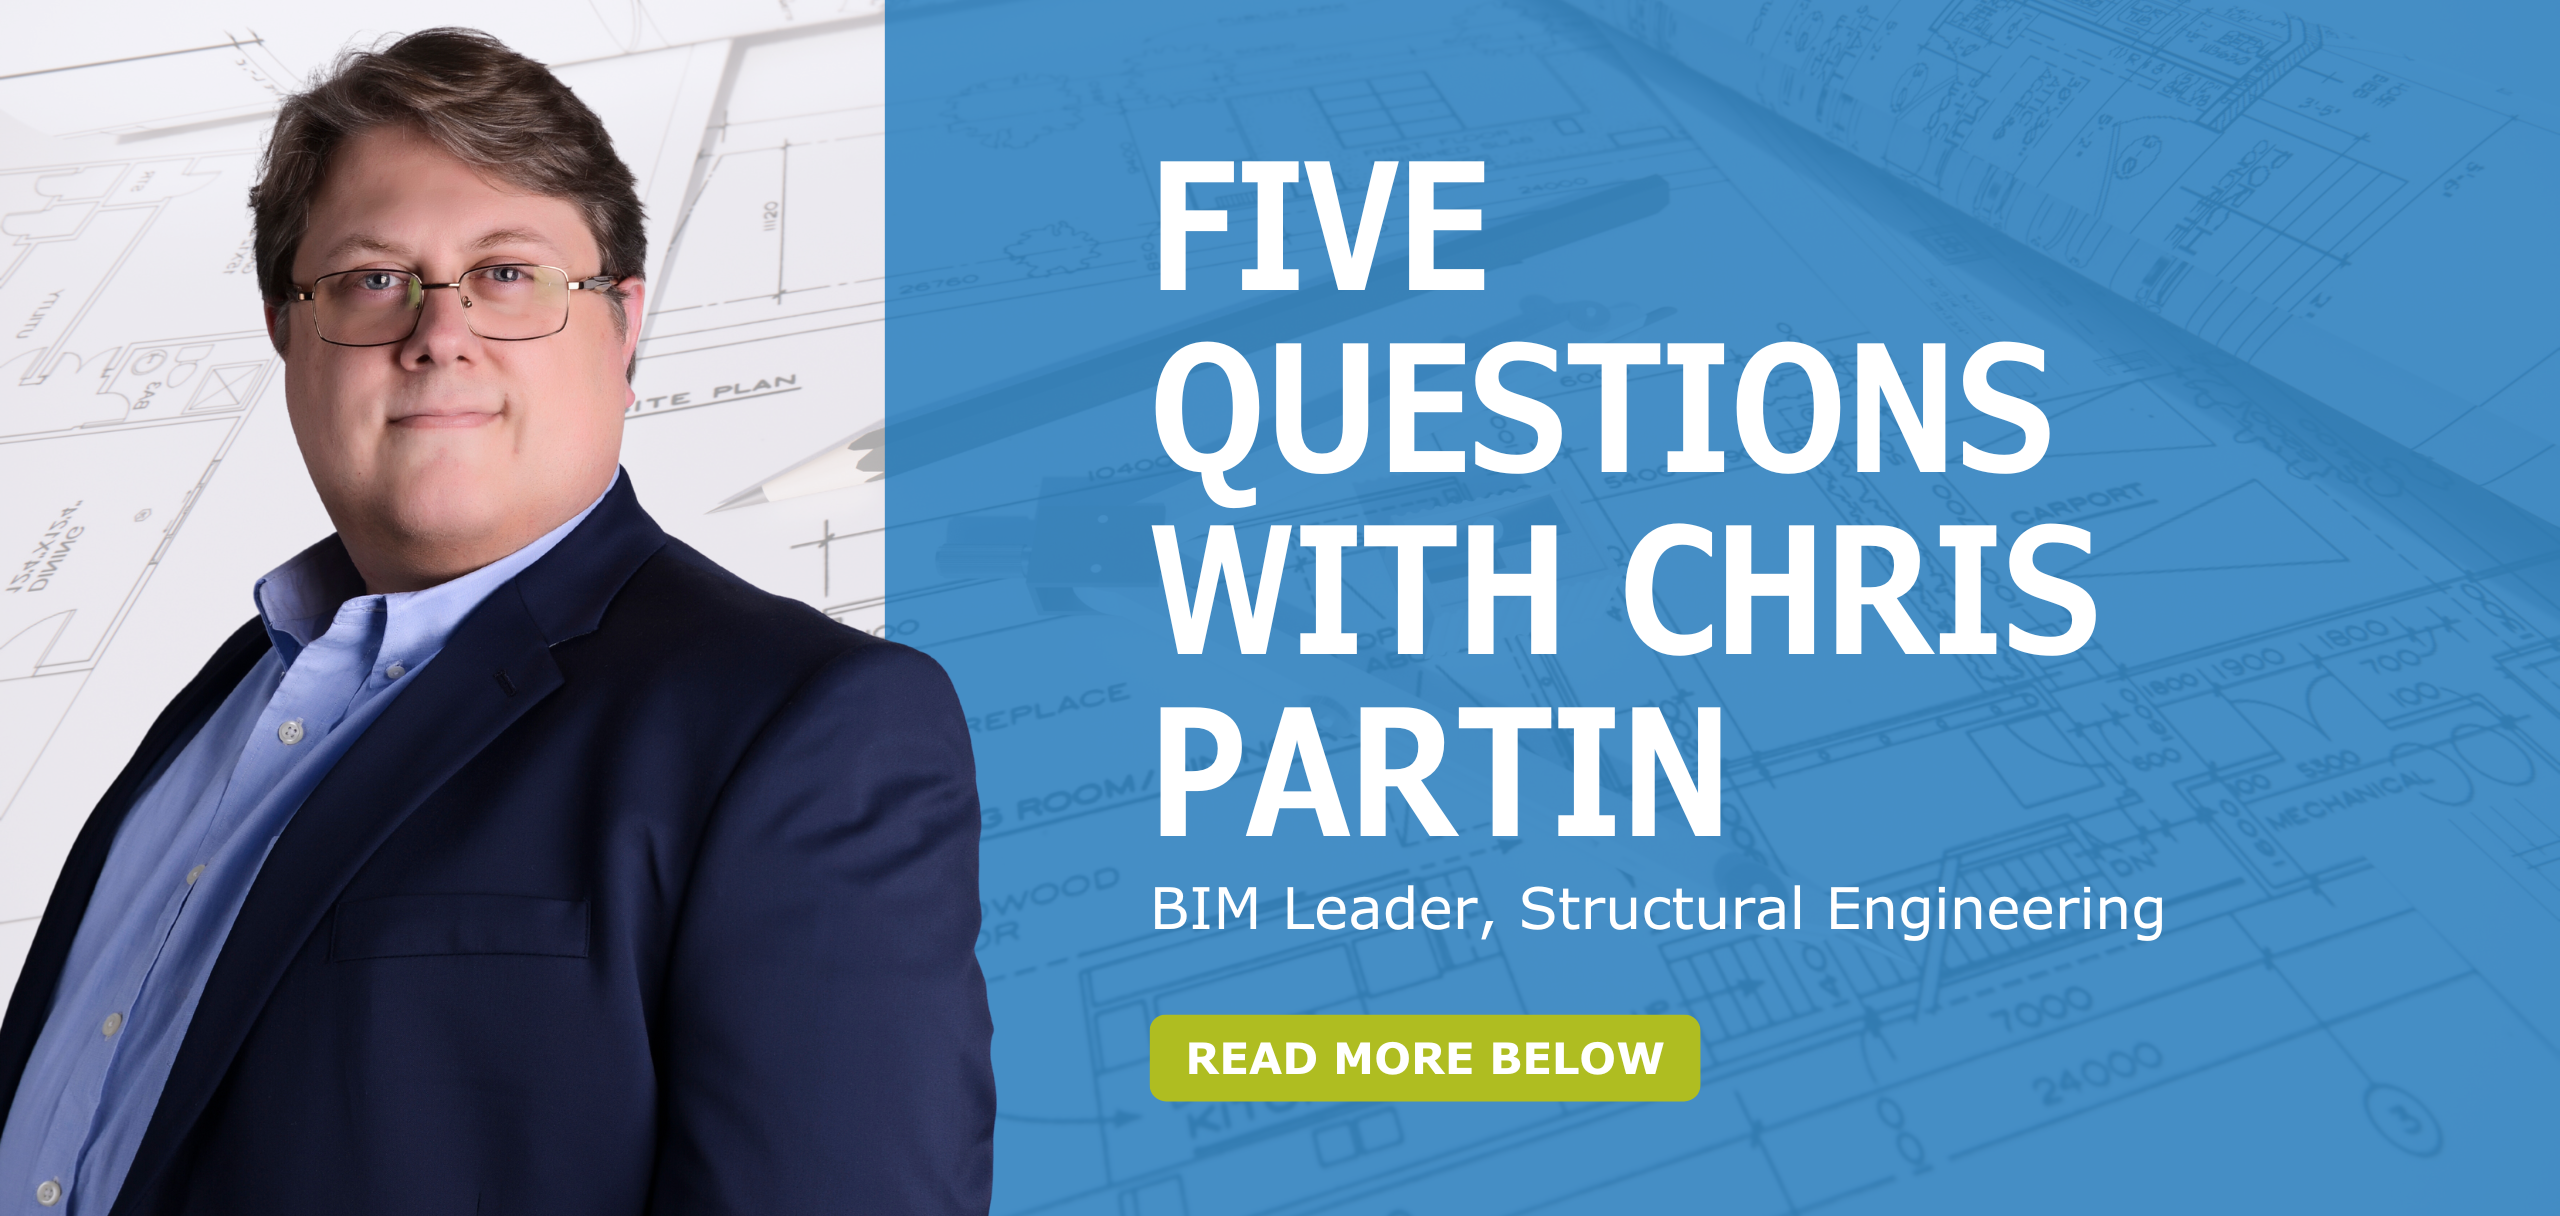 Five Questions with Chris Partin